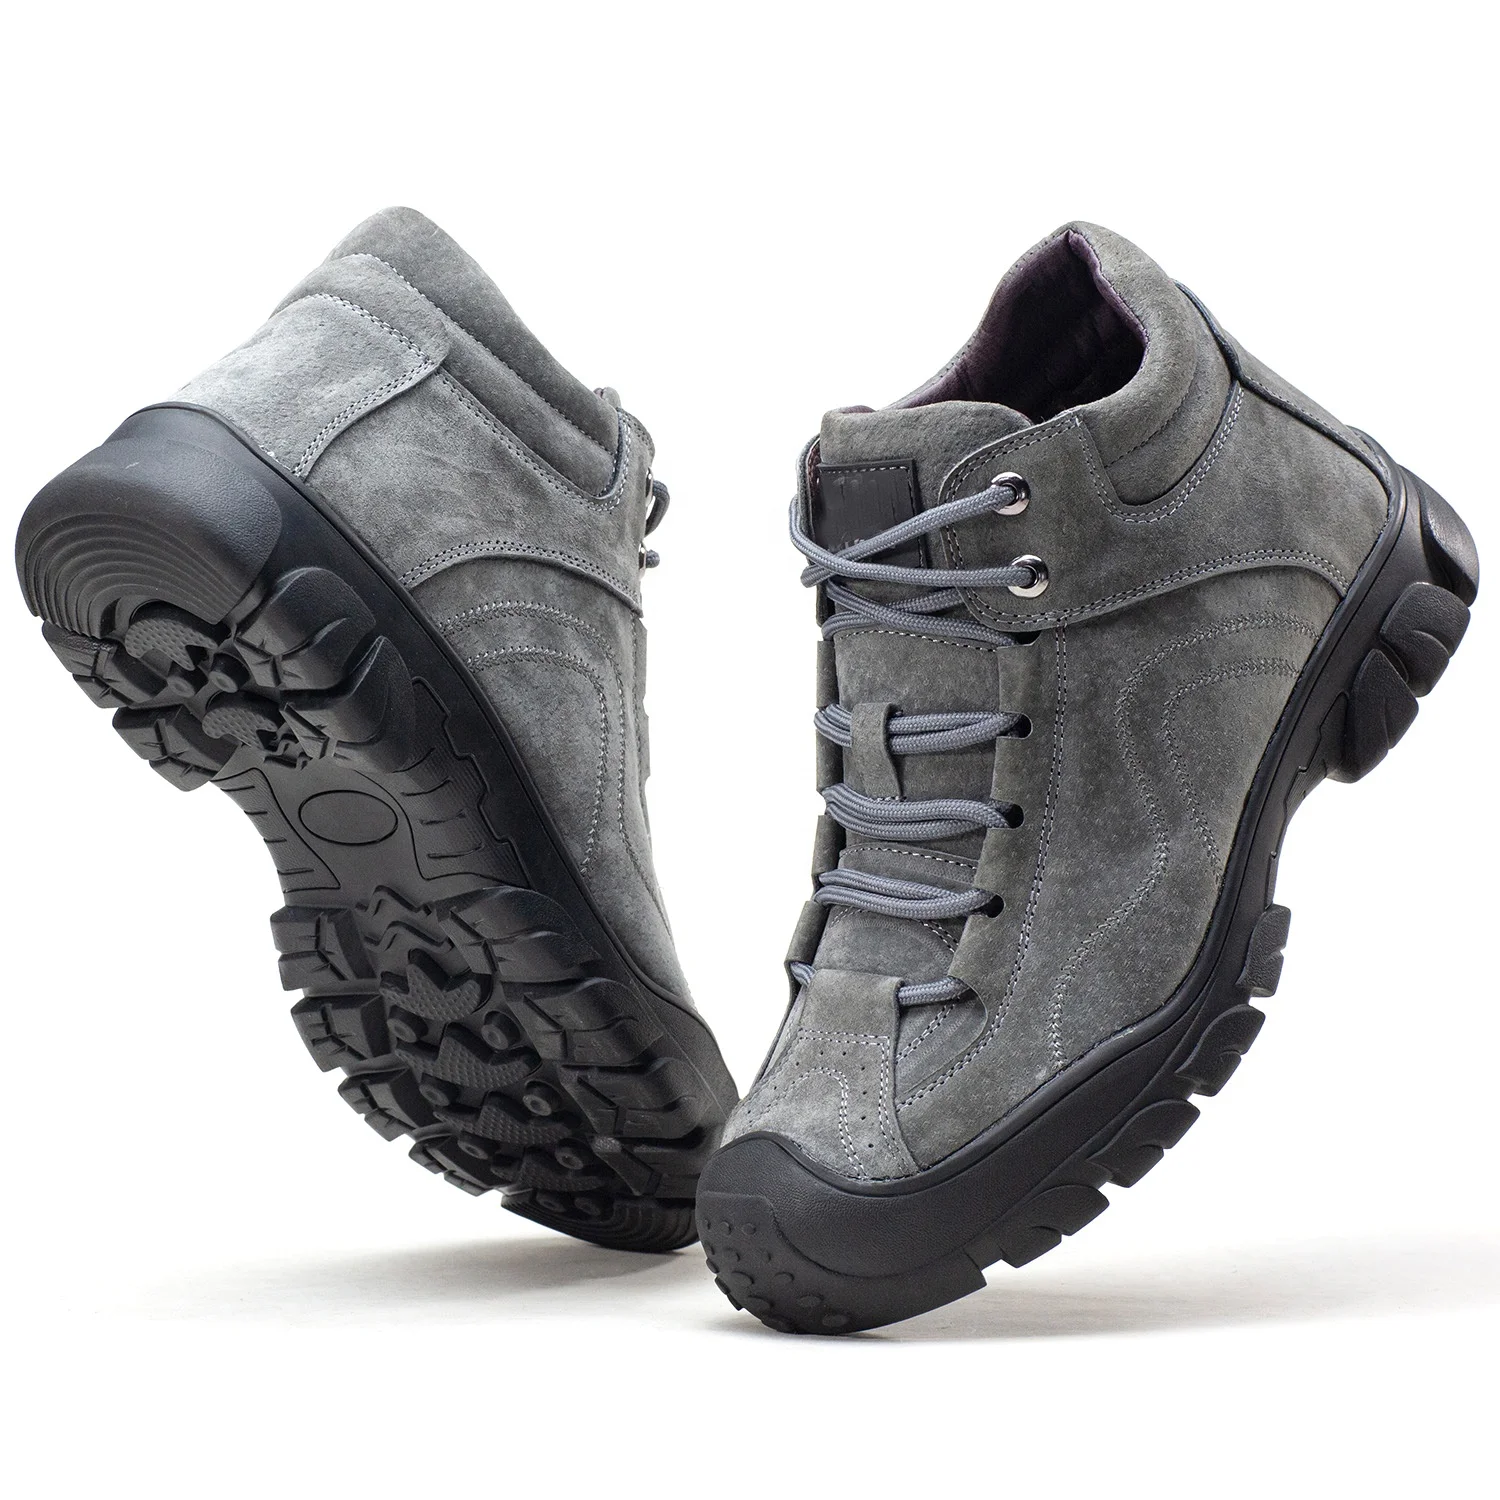 

High top leather oem boots S1 S2 S3 new design construction winter working steel toe in stock good low price safety shoes